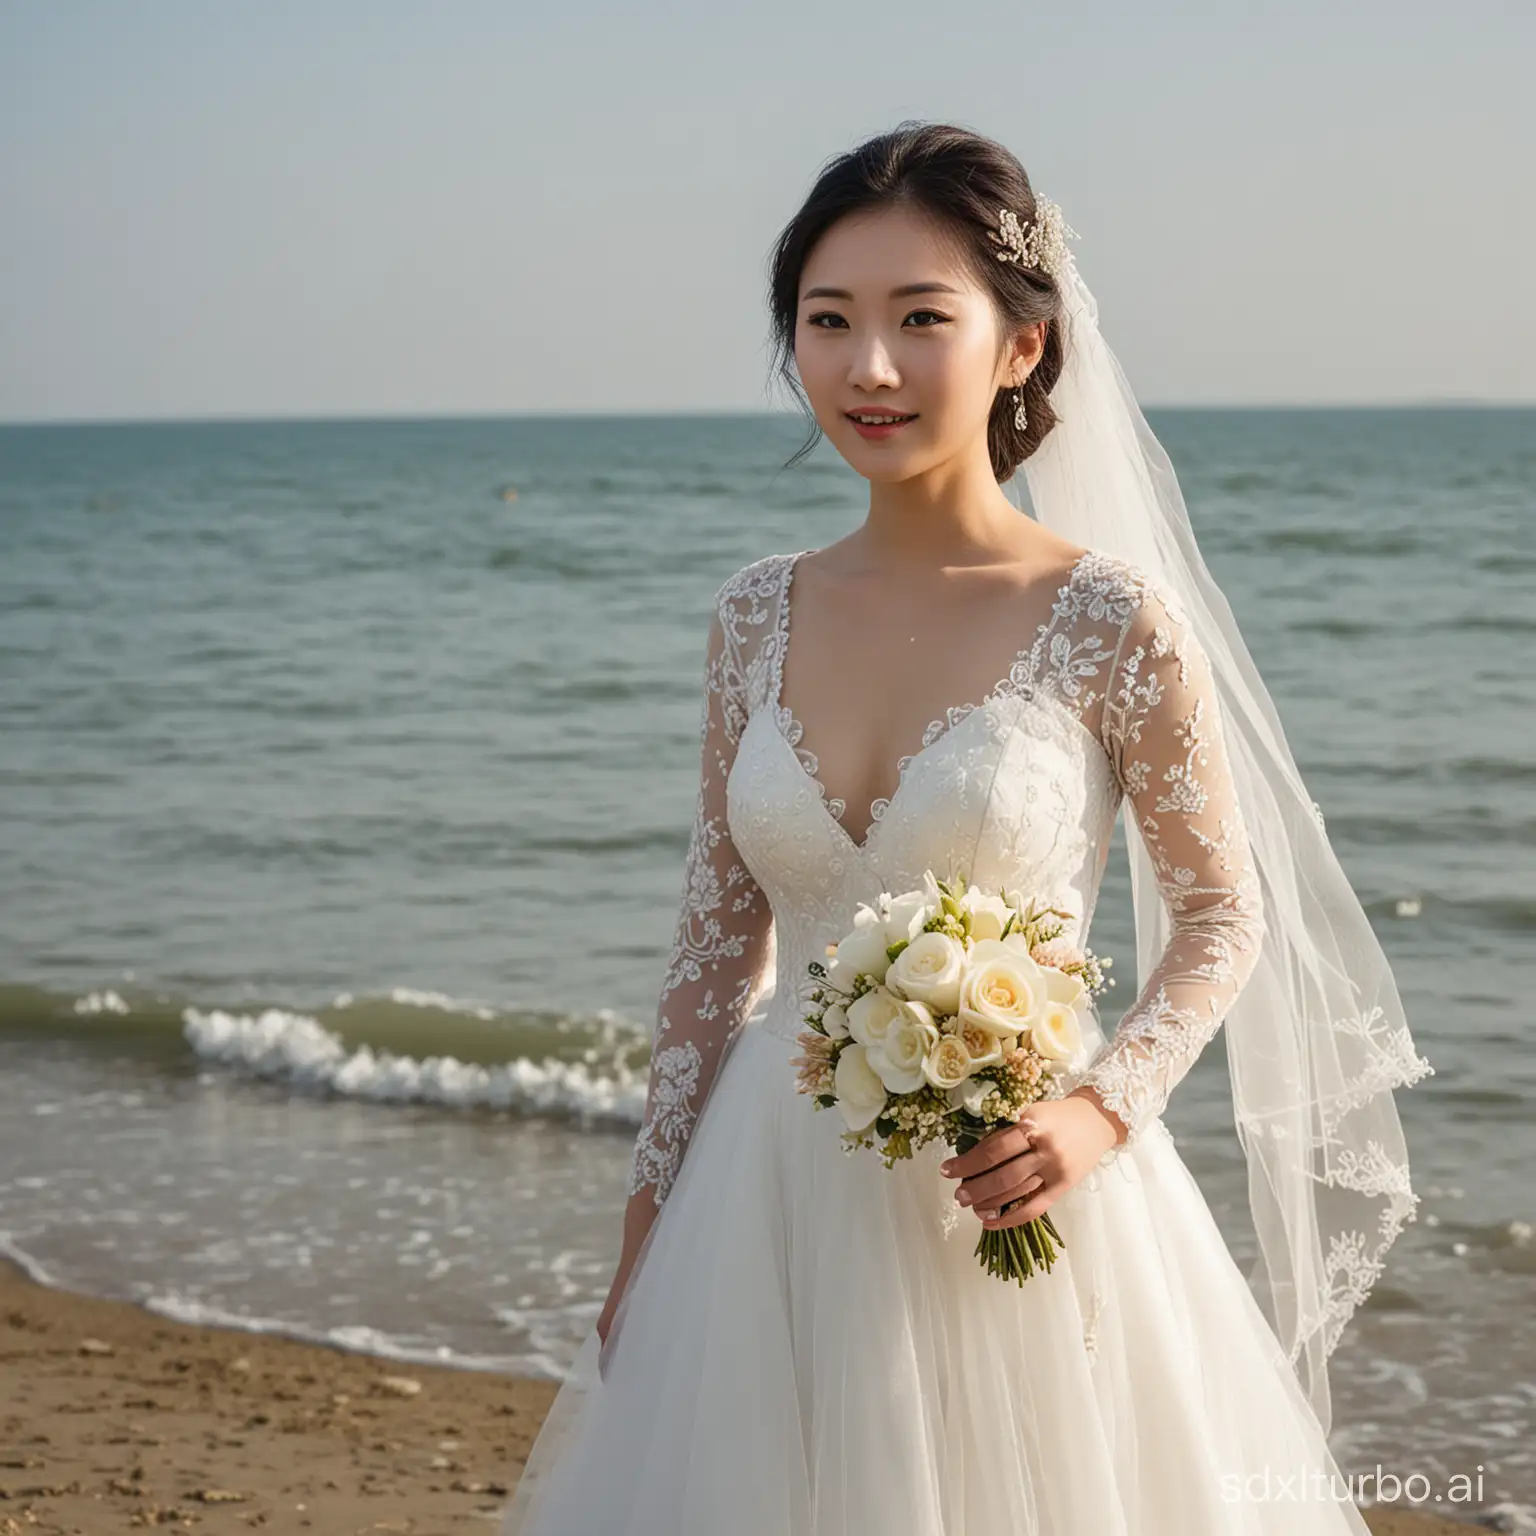 A Chinese girl at the seaside, wedding photography,